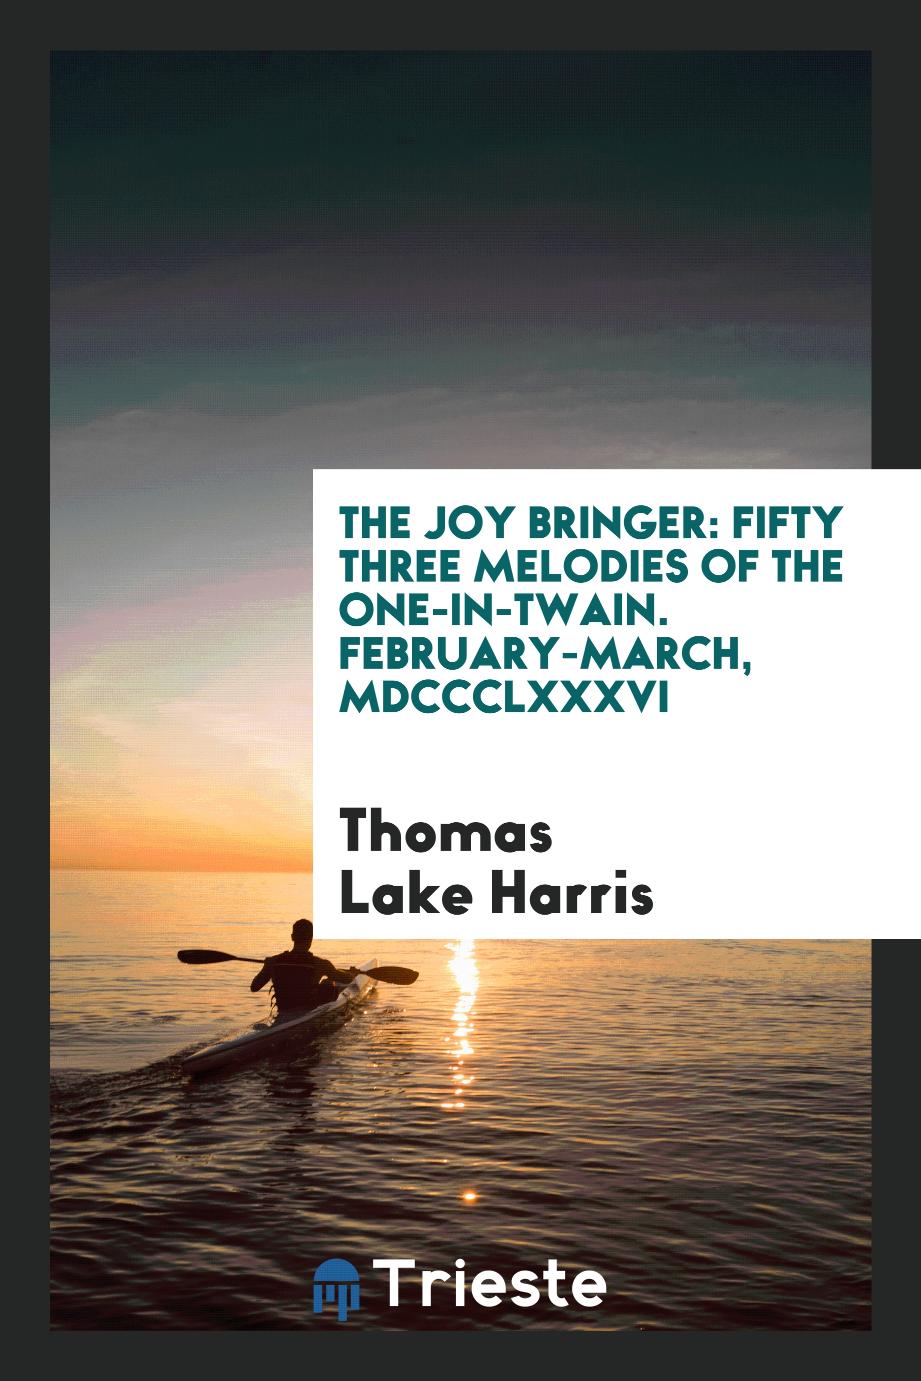 The Joy bringer: Fifty Three Melodies of the One-in-twain. February-March, MDCCCLXXXVI